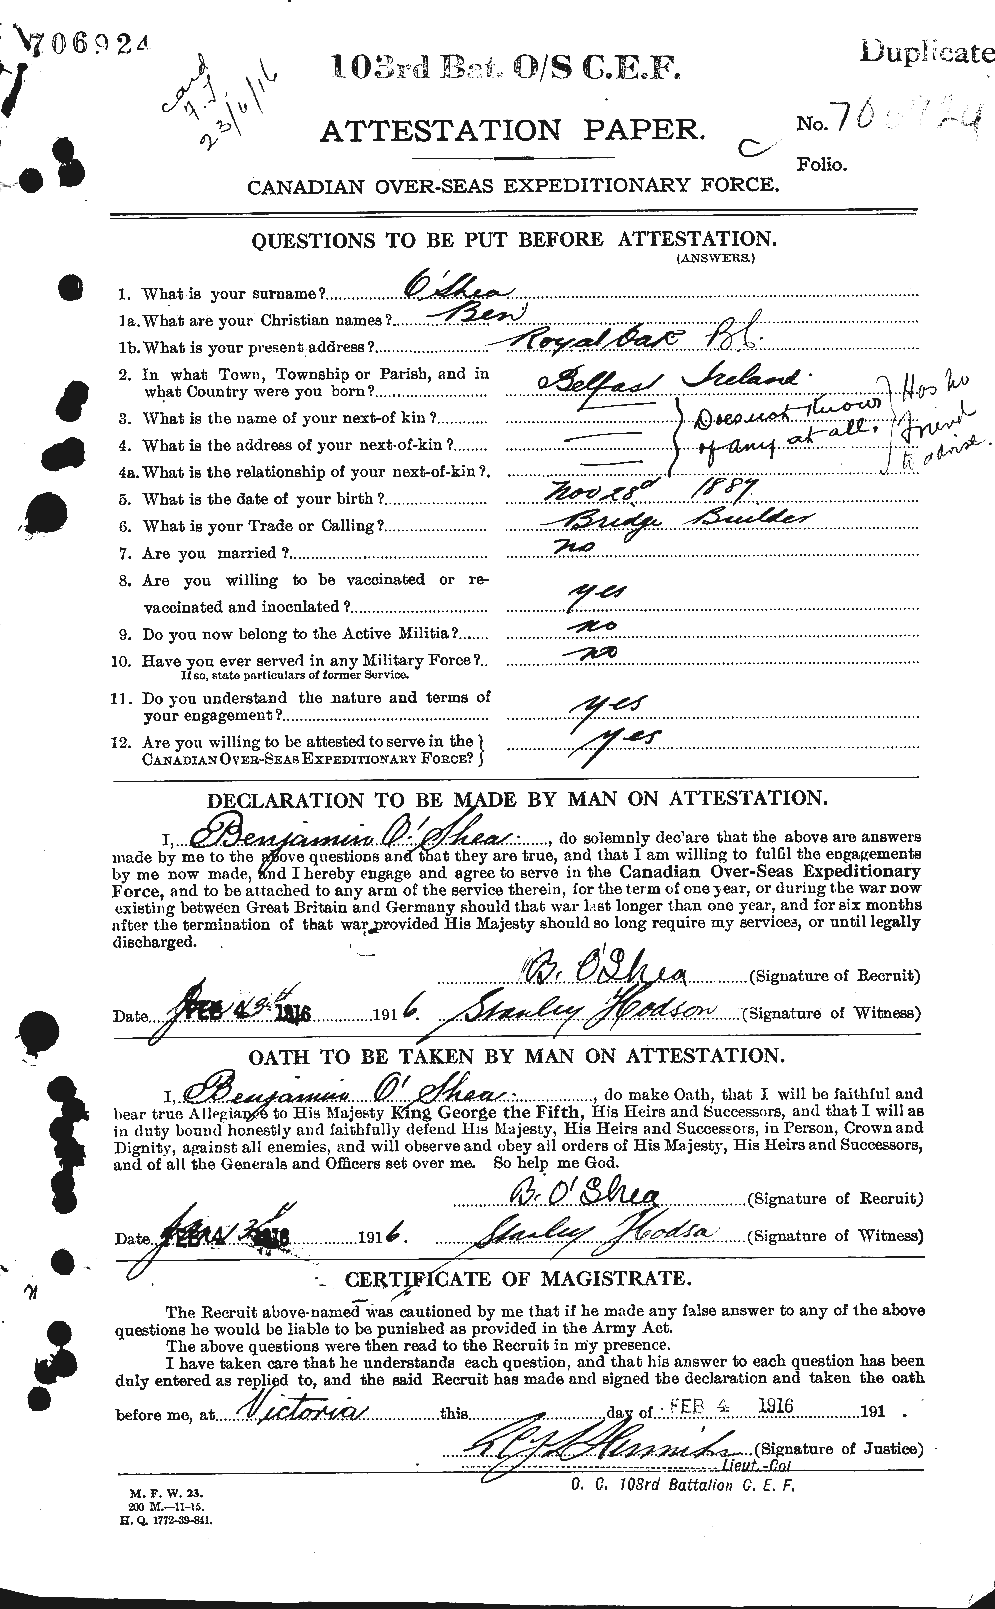 Personnel Records of the First World War - CEF 691788a